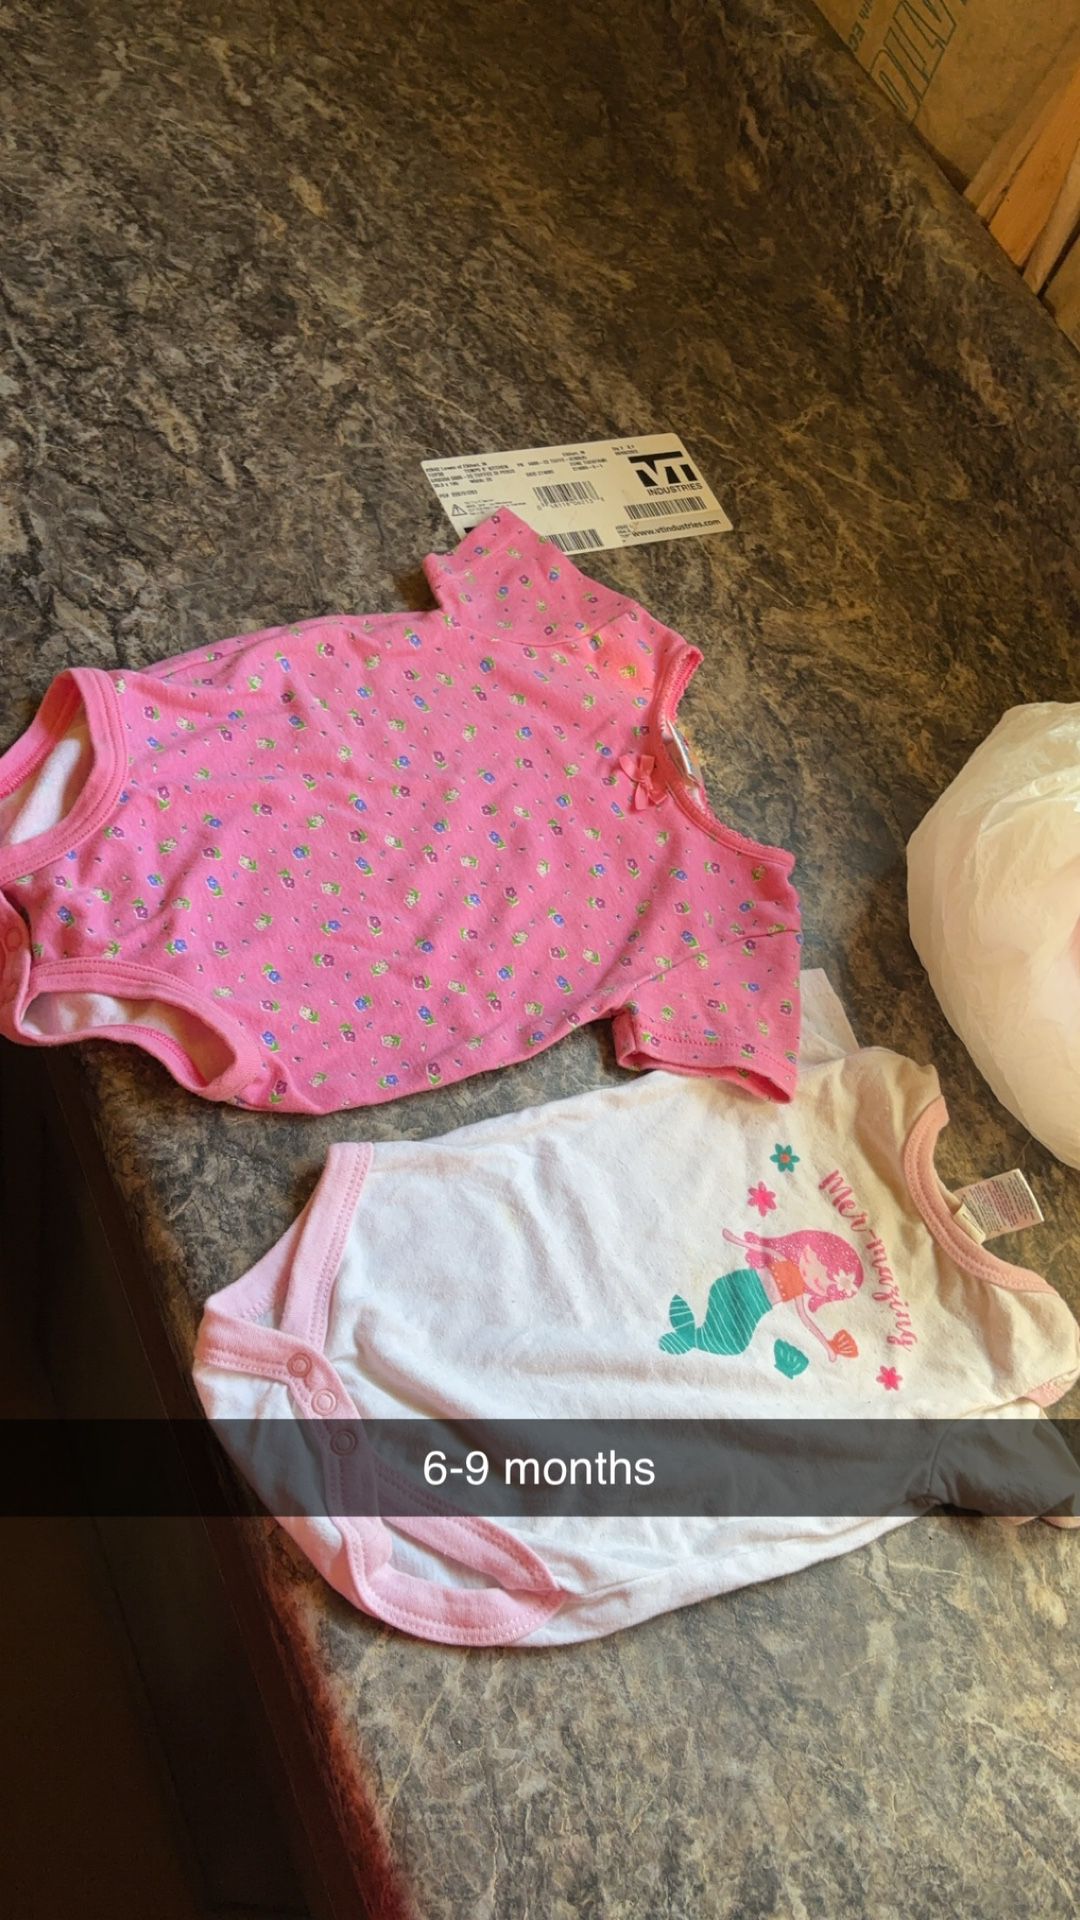 6-9 Month Babygirl Clothes $11